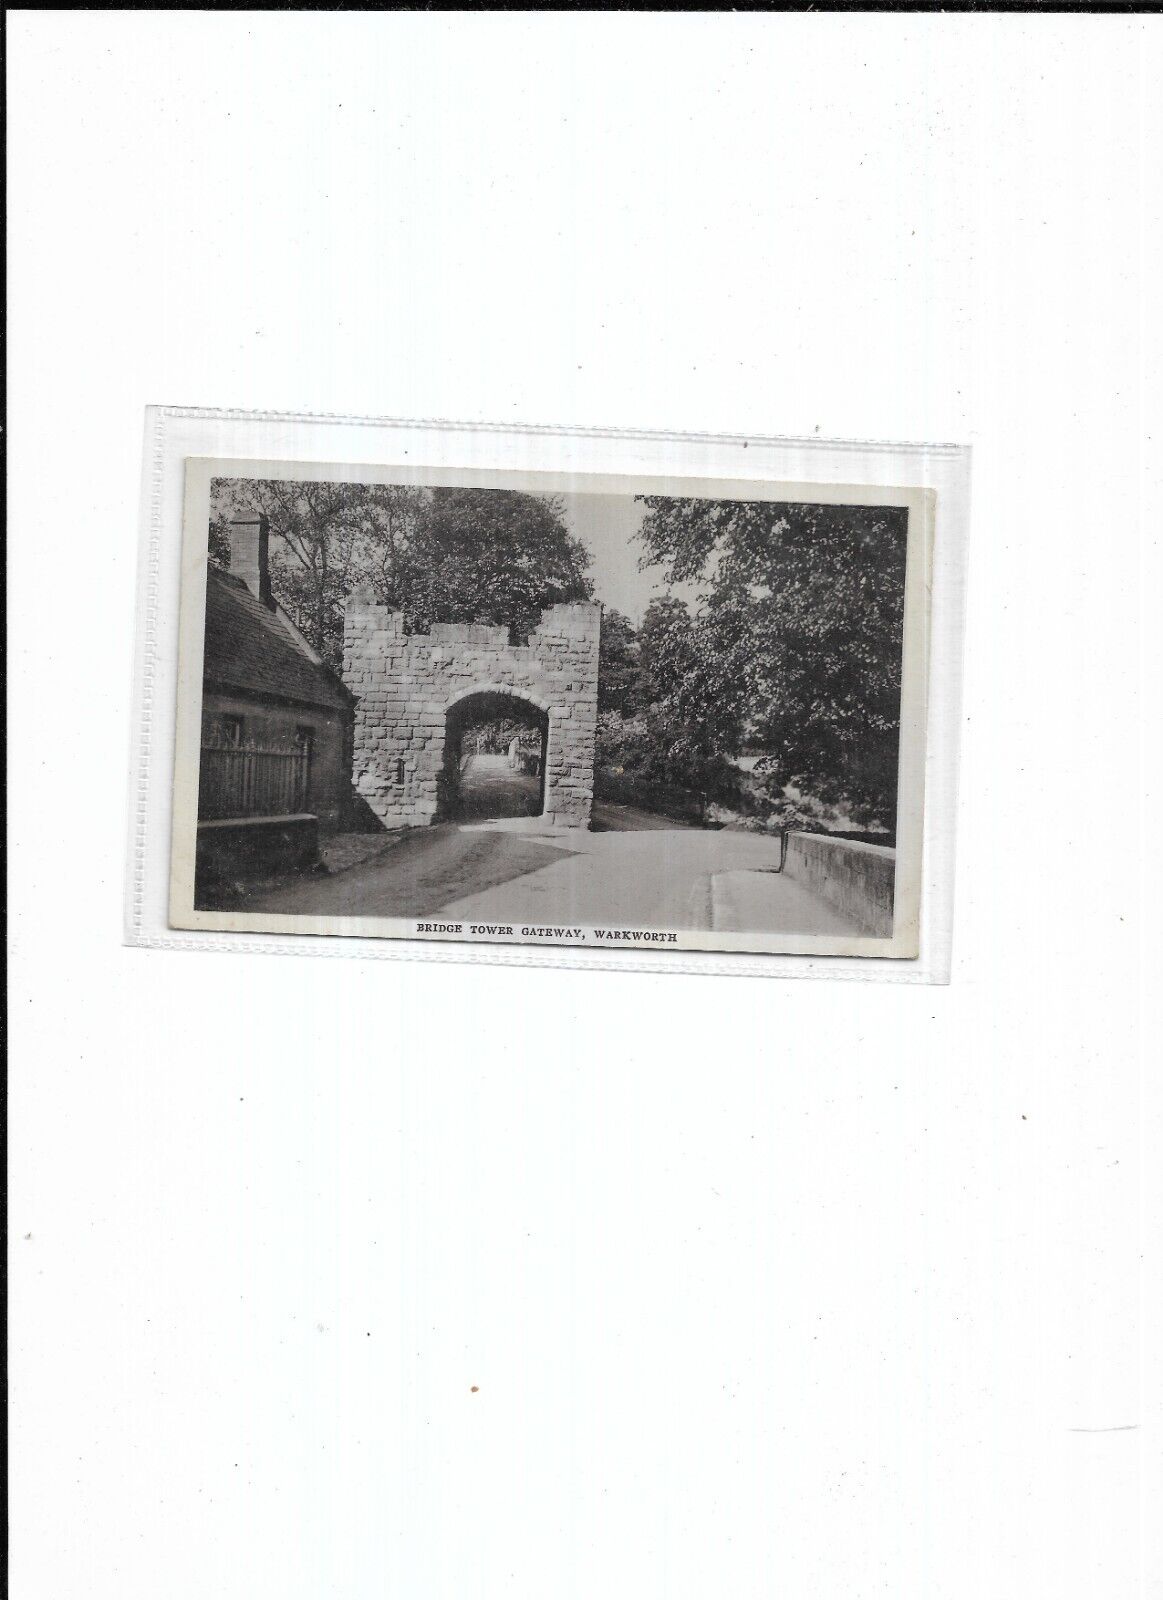 House Clearance - Northumberland Service 69 "Bridge Tower Gateway, Warkworth" Date Unknown